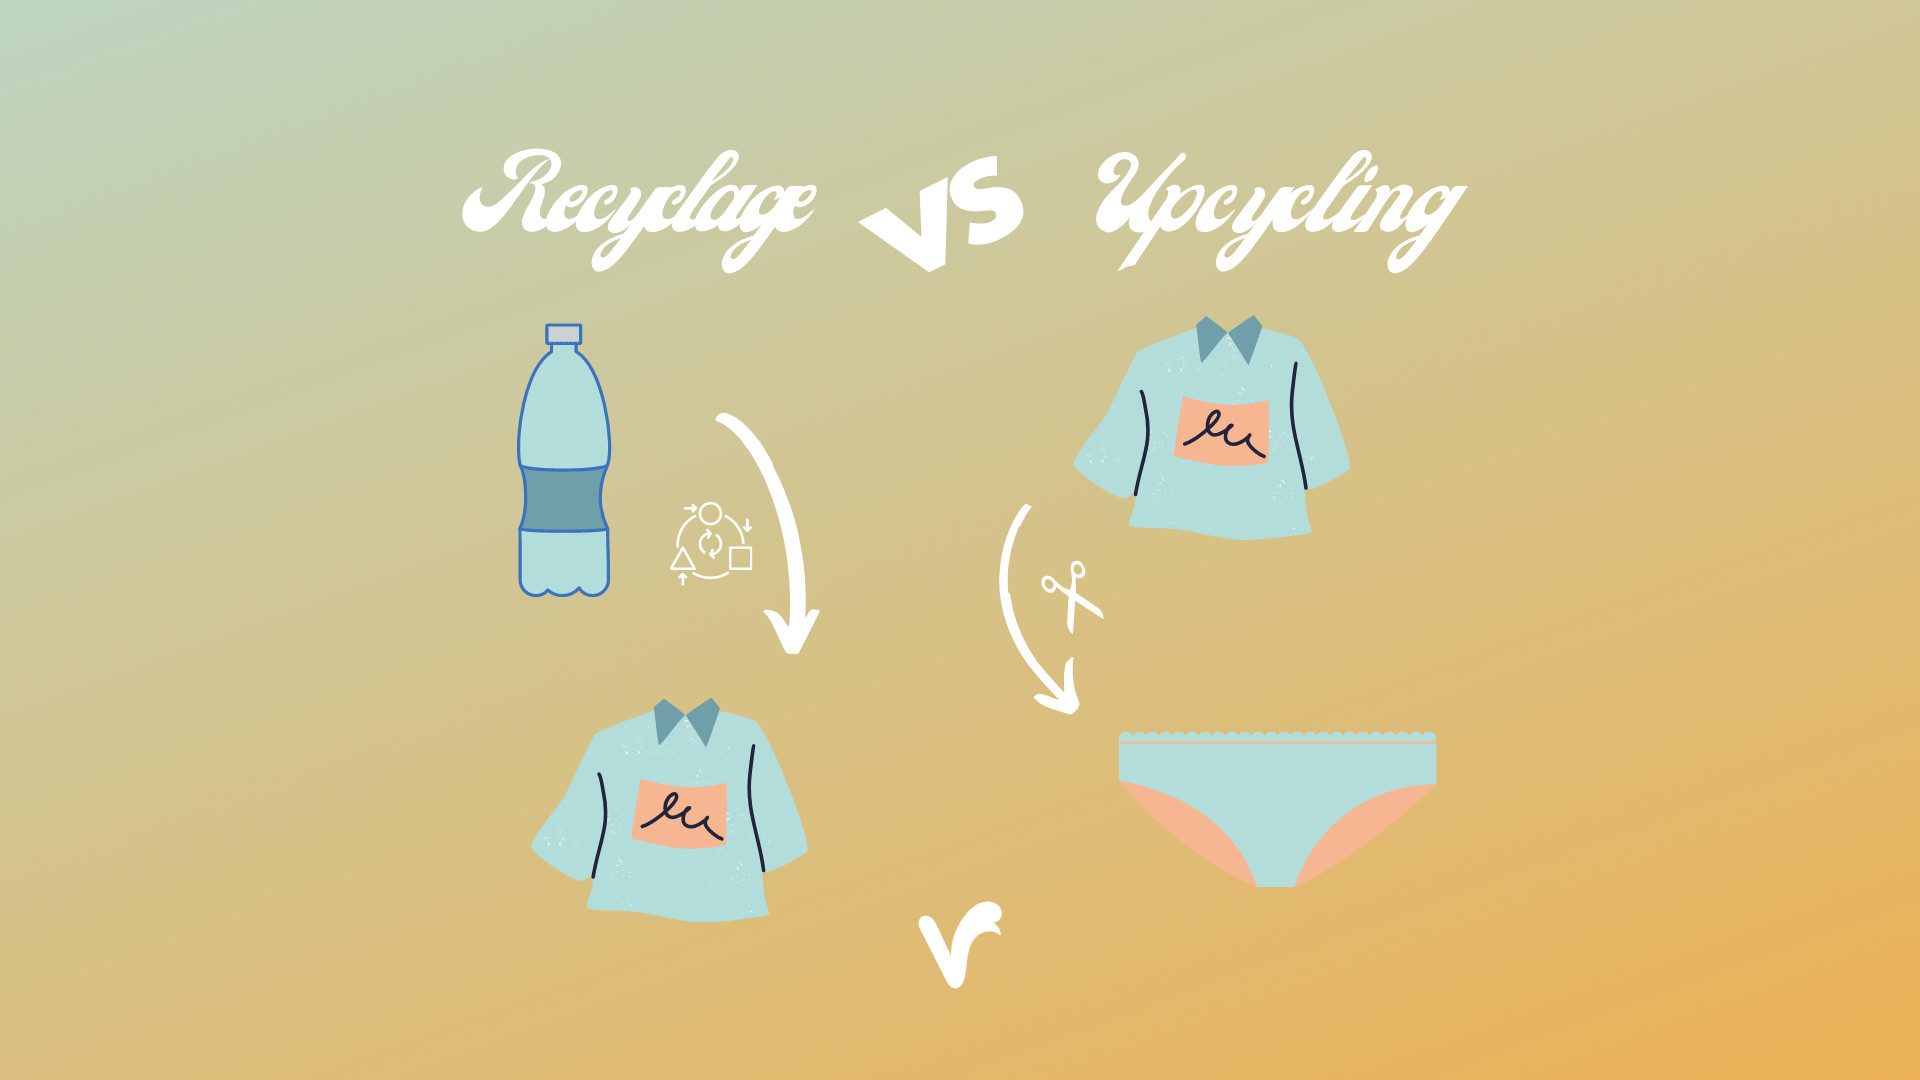 différence entre upcycling et recyclage